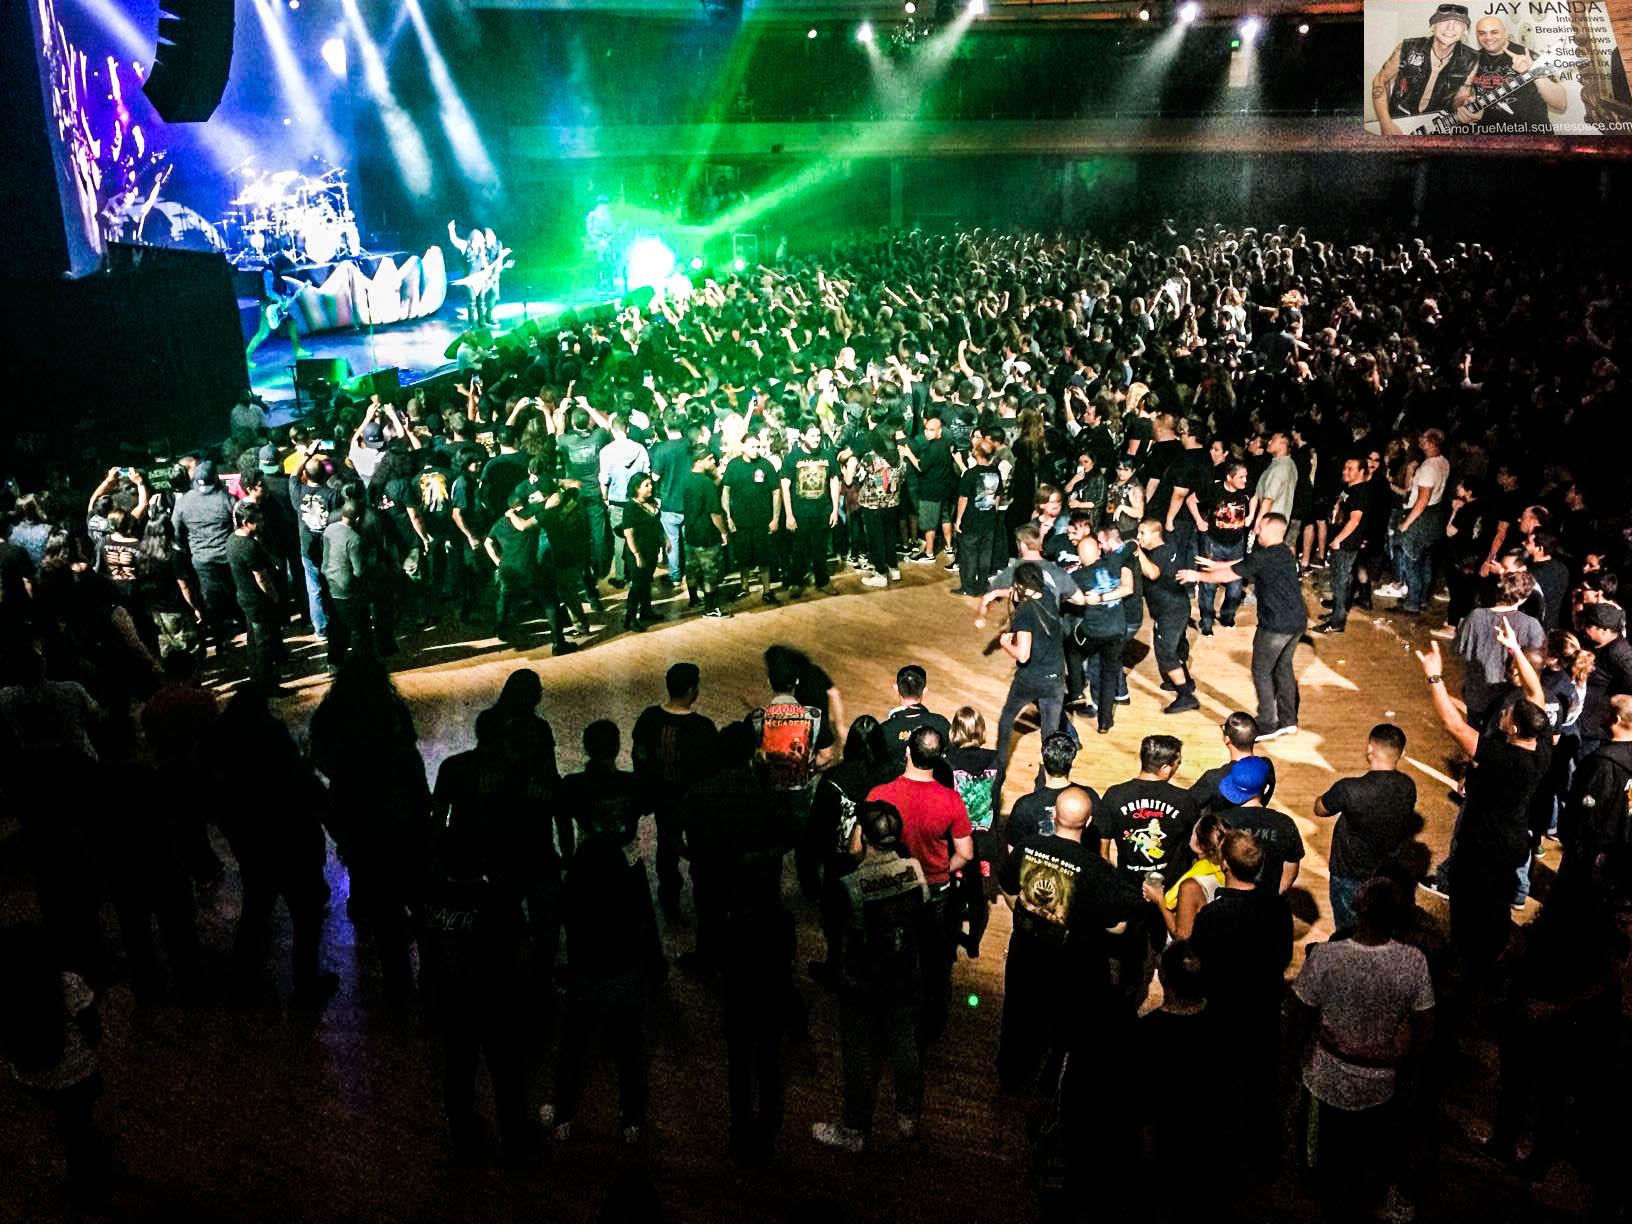  Two mosh pits and friendly dance circles continued strong toward the end of the concert, as seen from the upper level of the Palladium. 